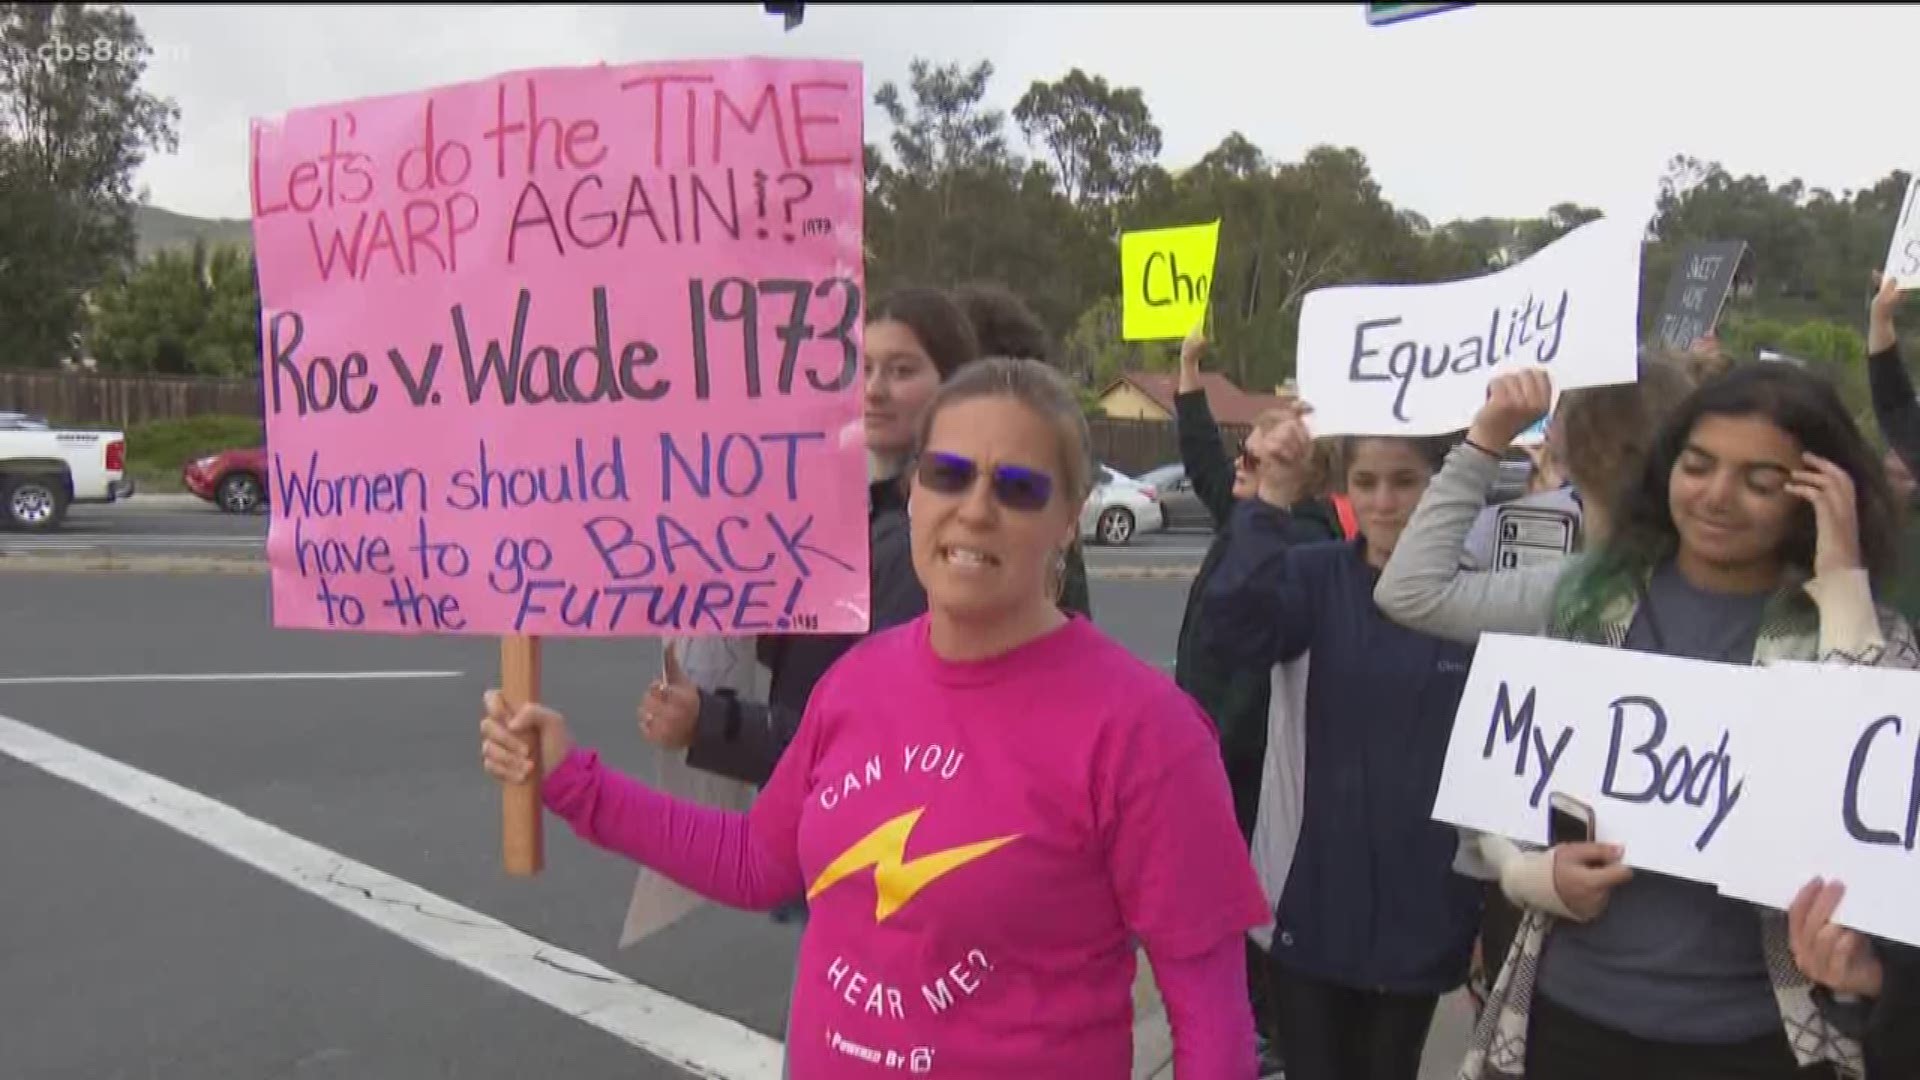 A number of rallies were held in San Diego and across the country as part of a National "Day of Action" against the laws.